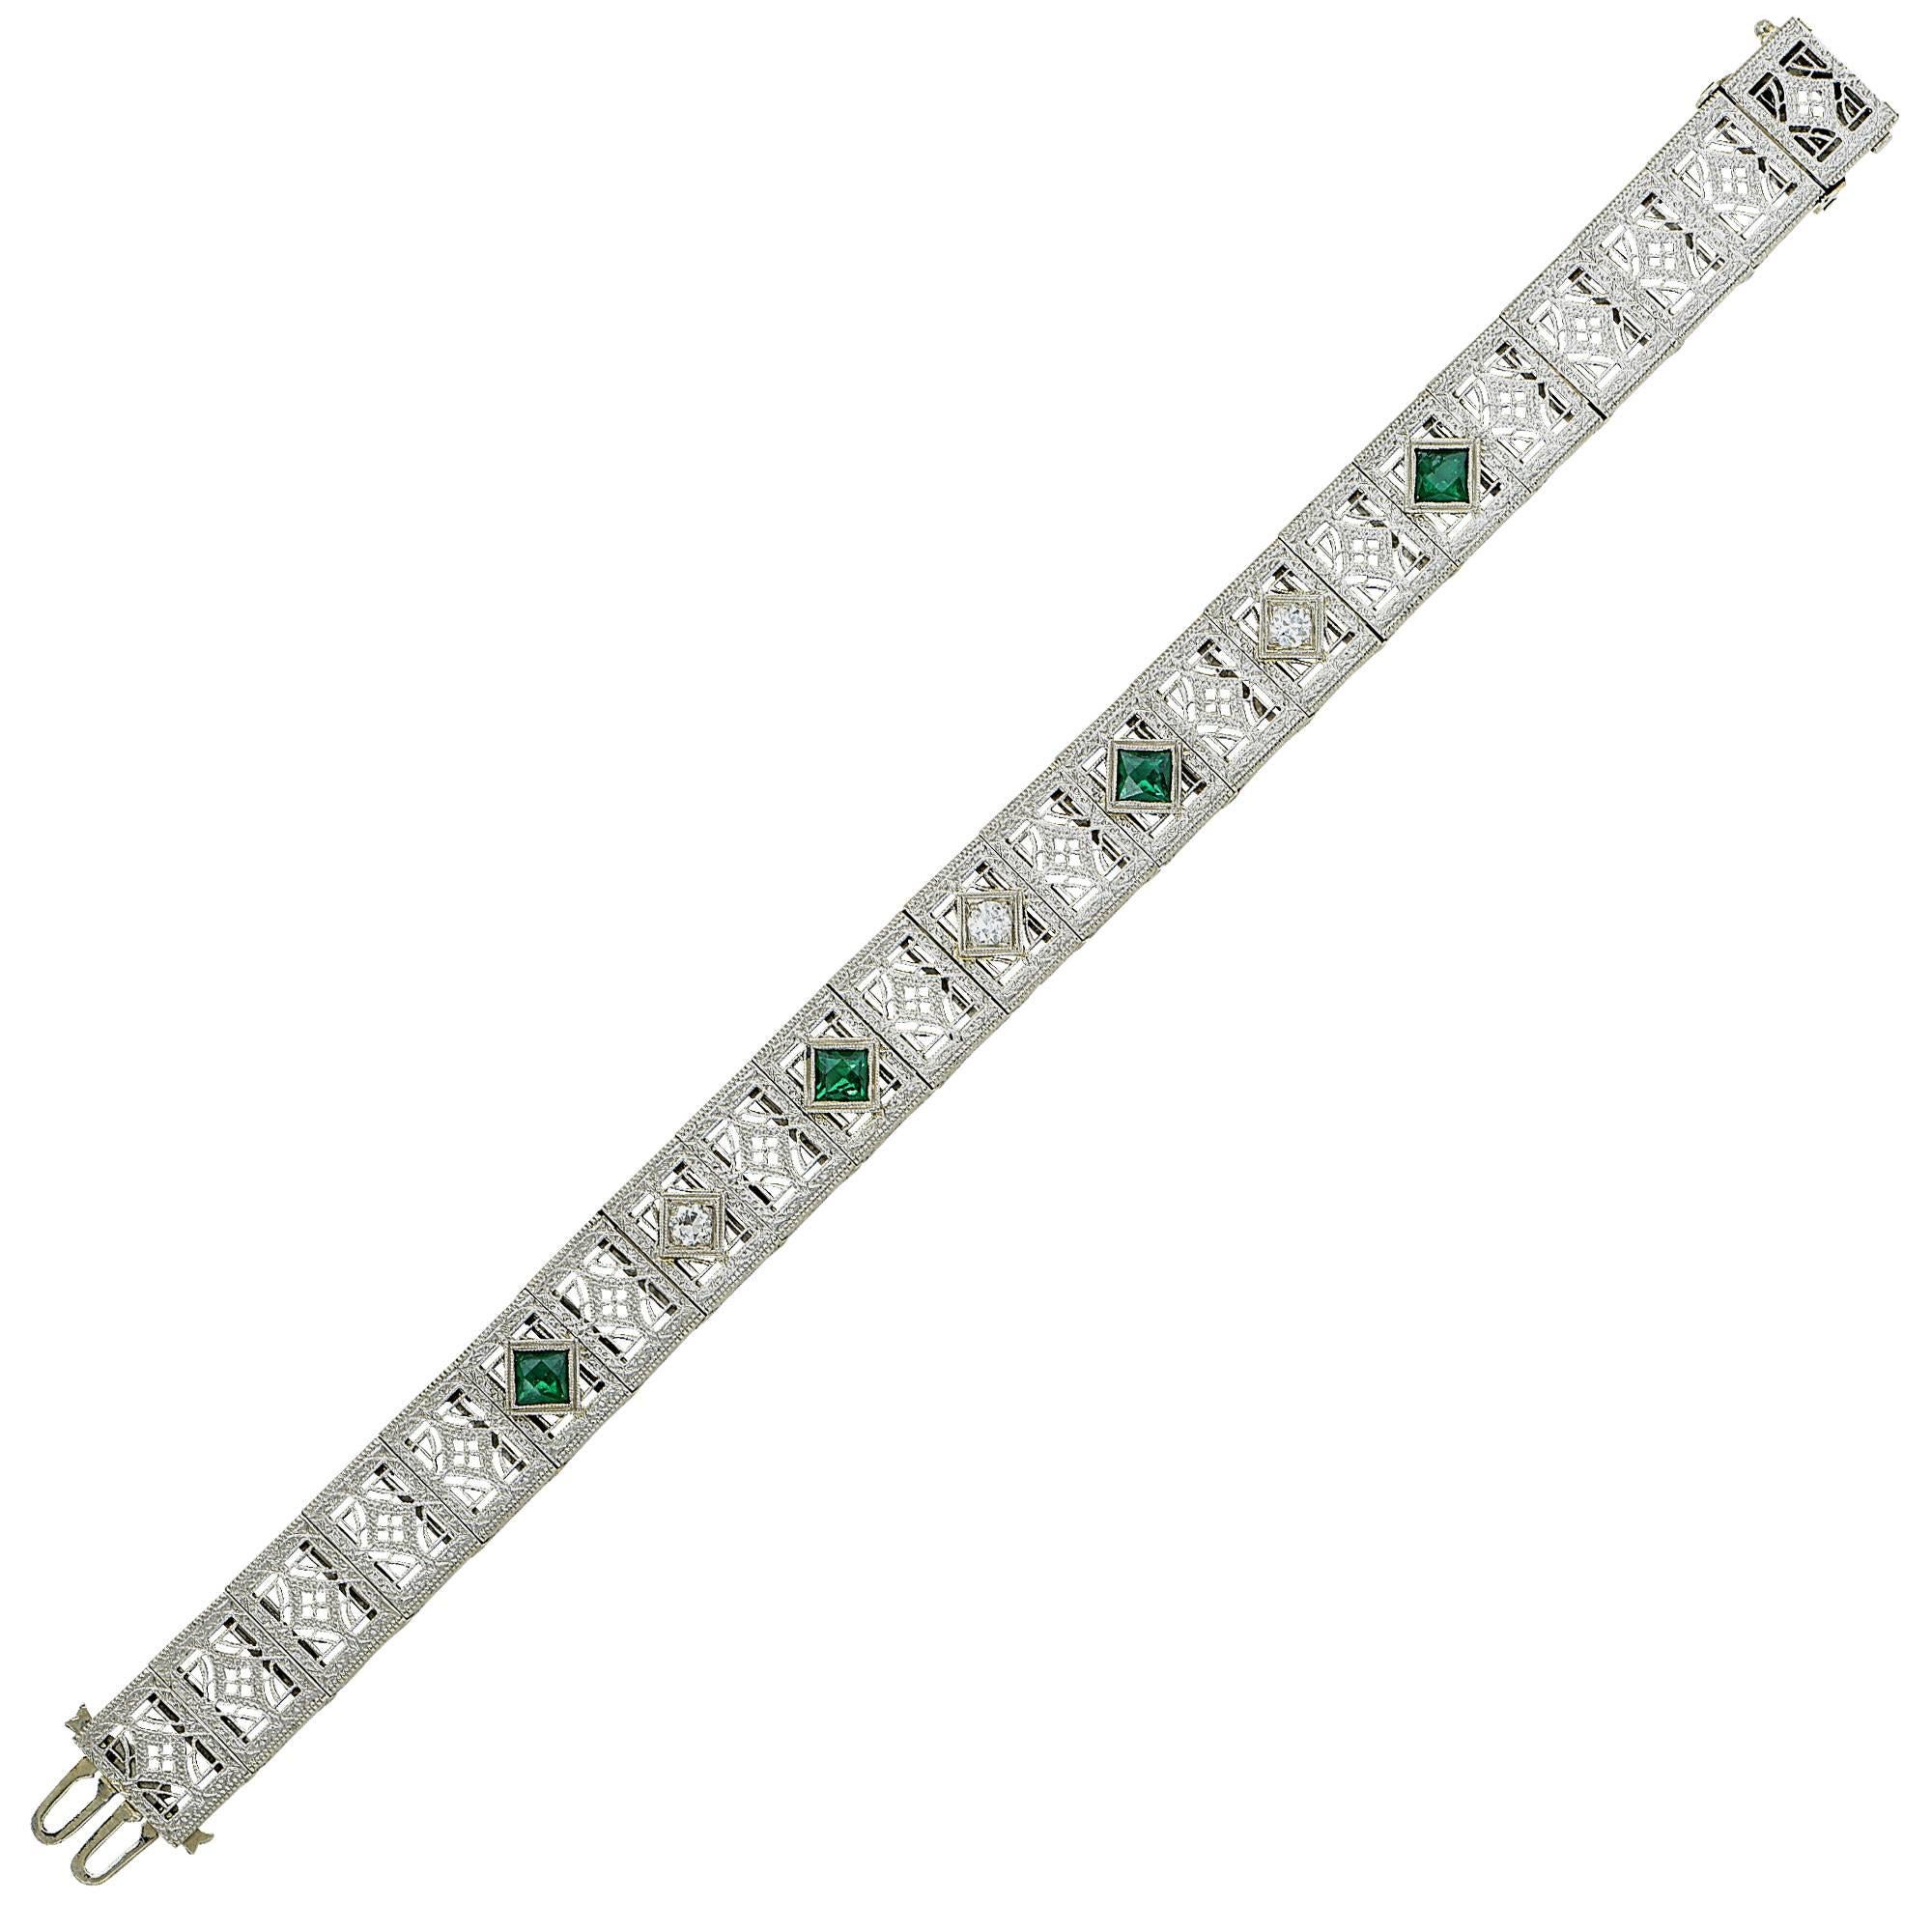 Platinum and 14k white gold bracelet featuring 3 old European cut diamonds weighing approximately .50cts total, G color VS clarity, accented by 4 square cut green gemstones.

Metal weight: 19.12 grams

This diamond bracelet is accompanied by a